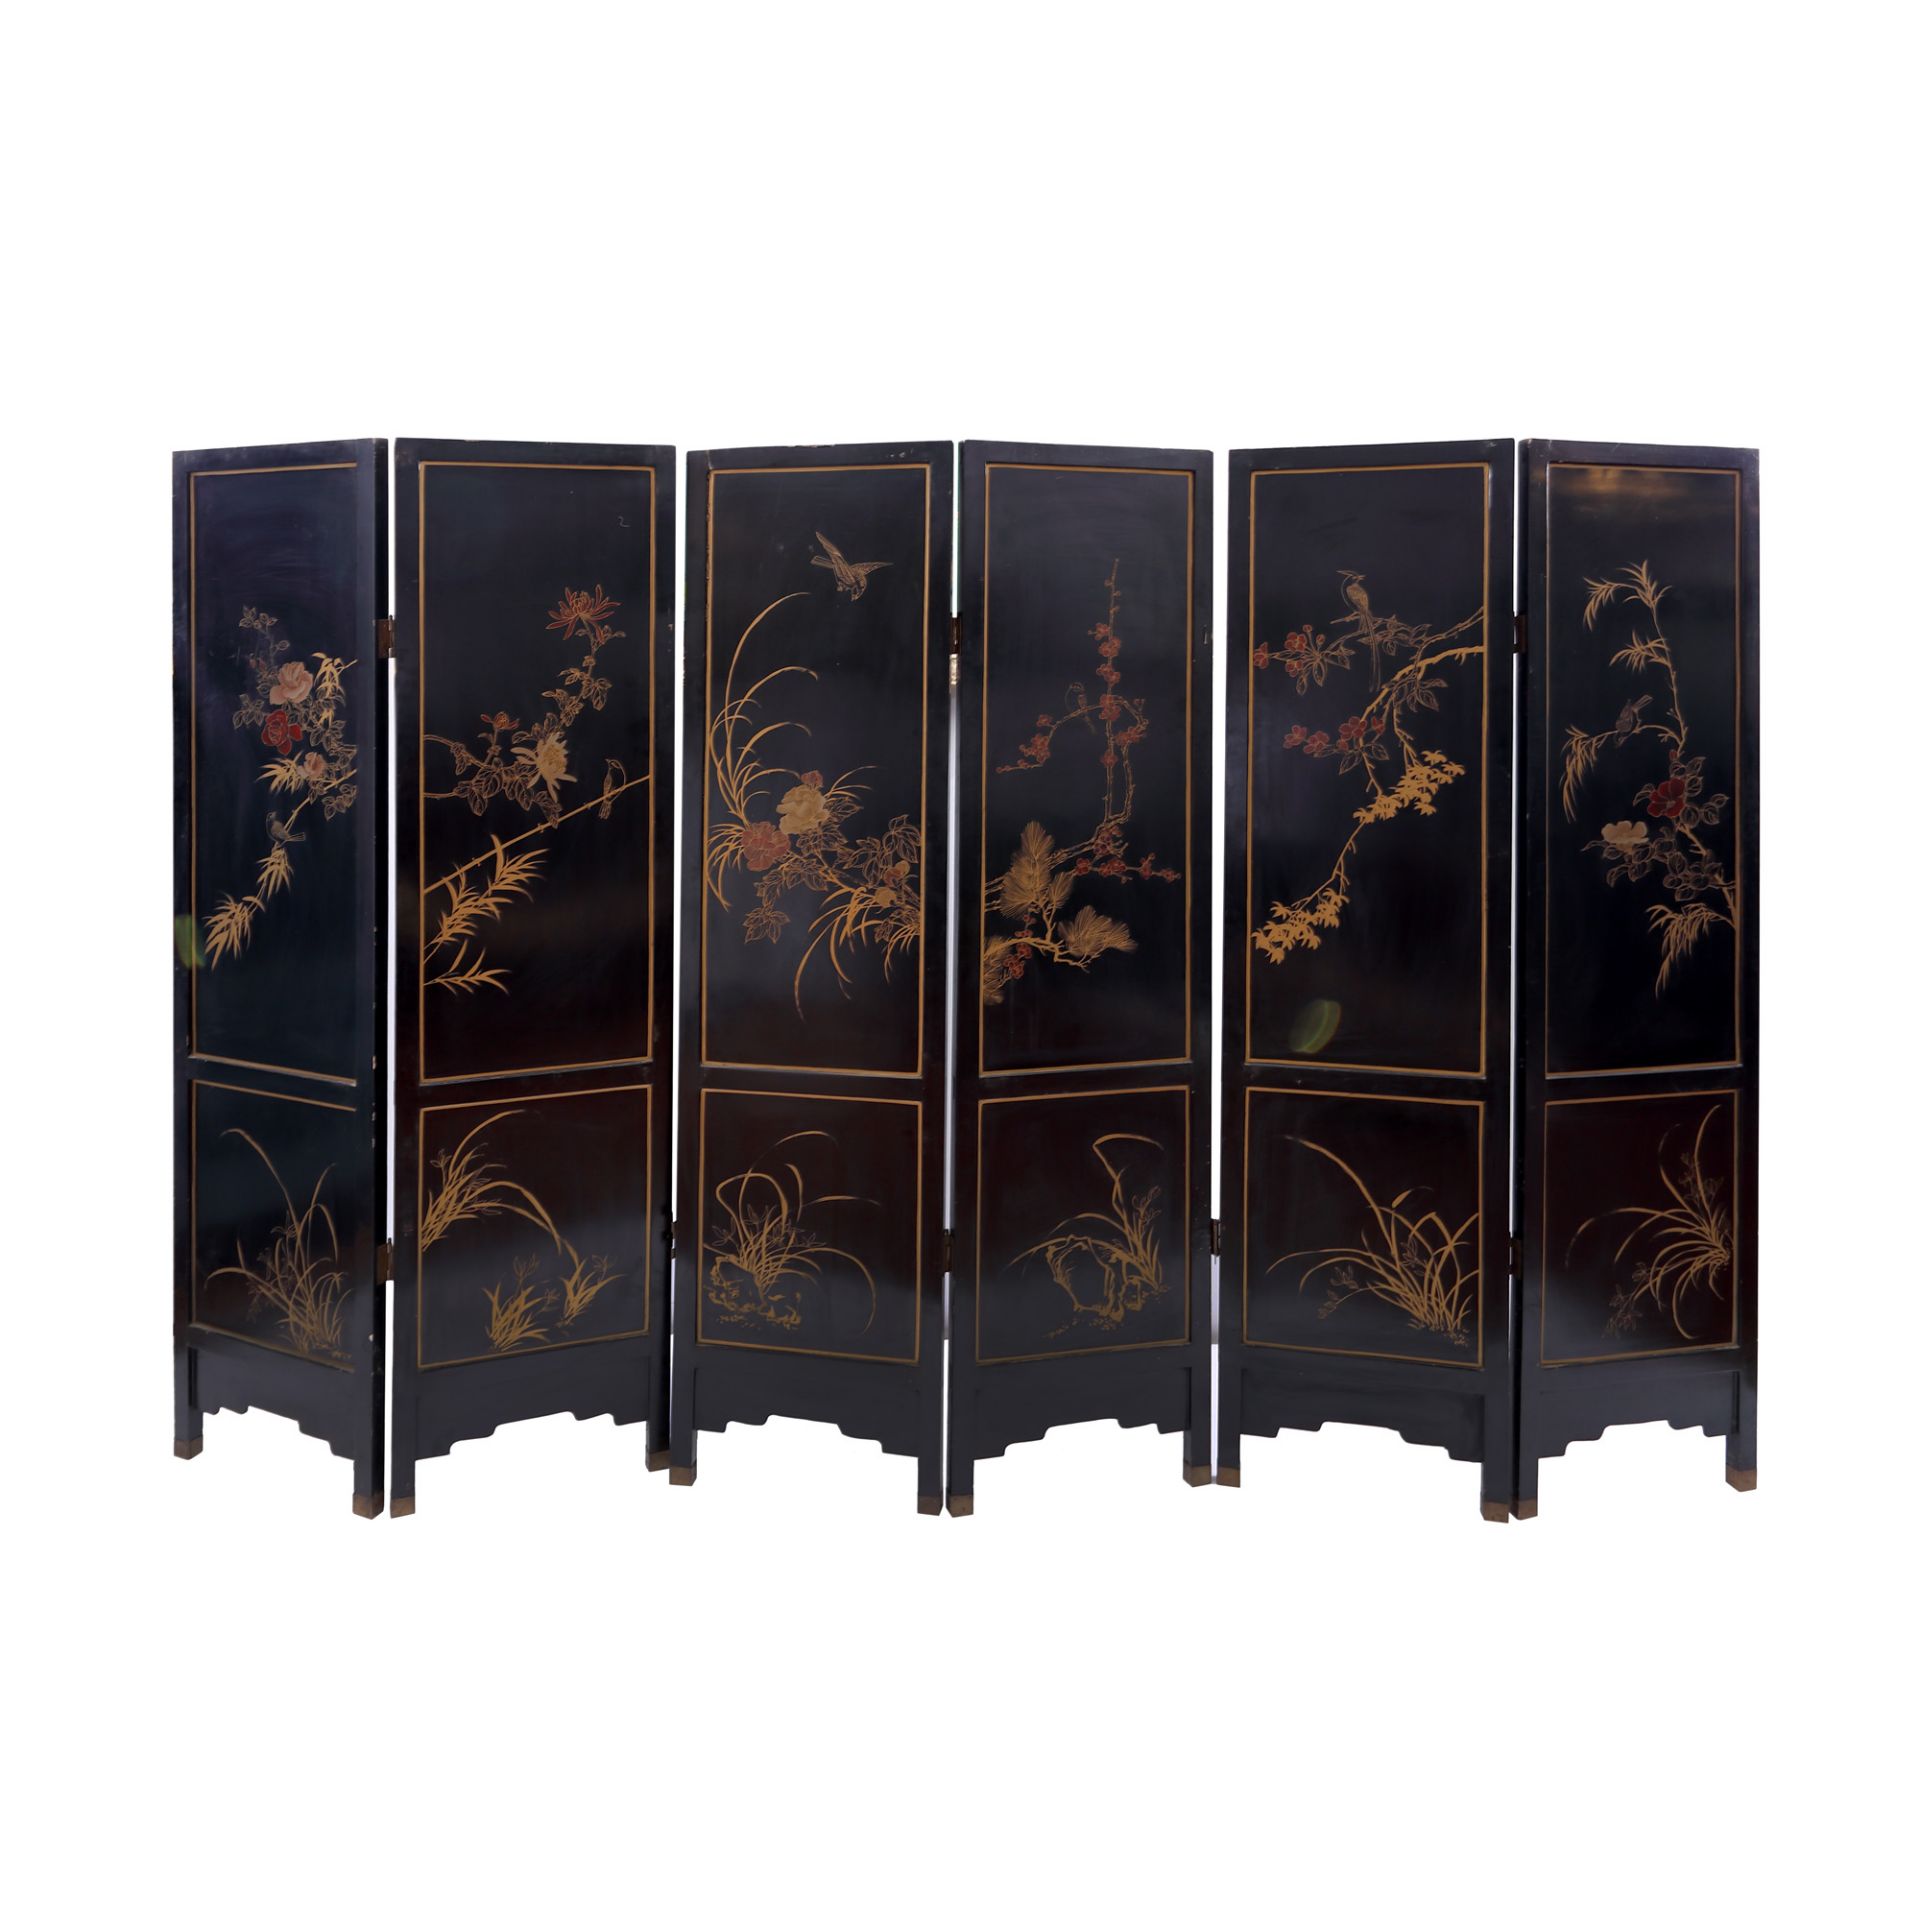 "Courtesans in the Forbidden Palace" - Coromandel-type screen, made of laque de Chine, decorated wit - Image 7 of 9